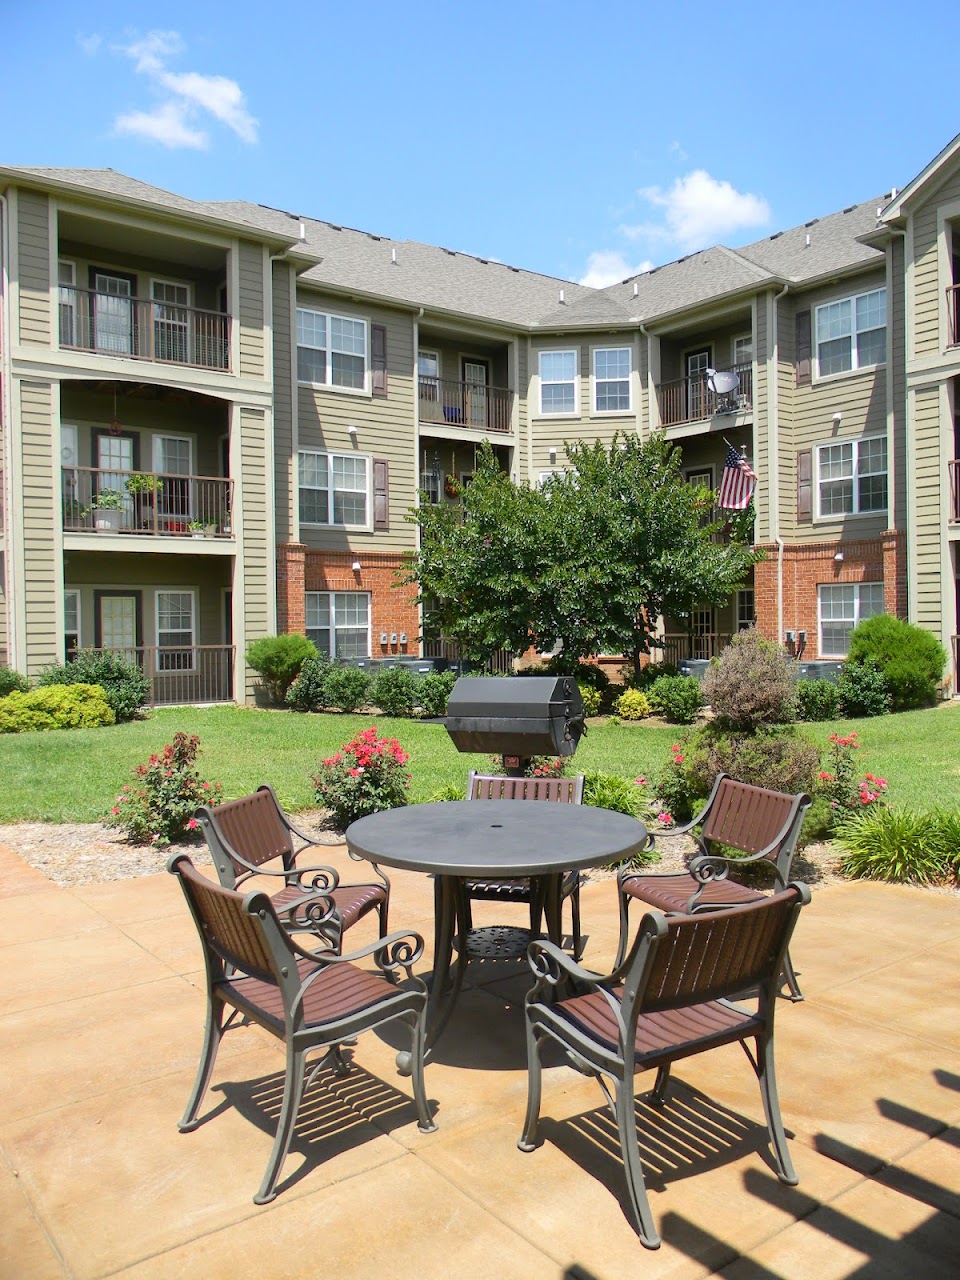 Photo of THE VILLAS AT COPPER LEAF. Affordable housing located at 305 E PEACHTREE DR NIXA, MO 65714